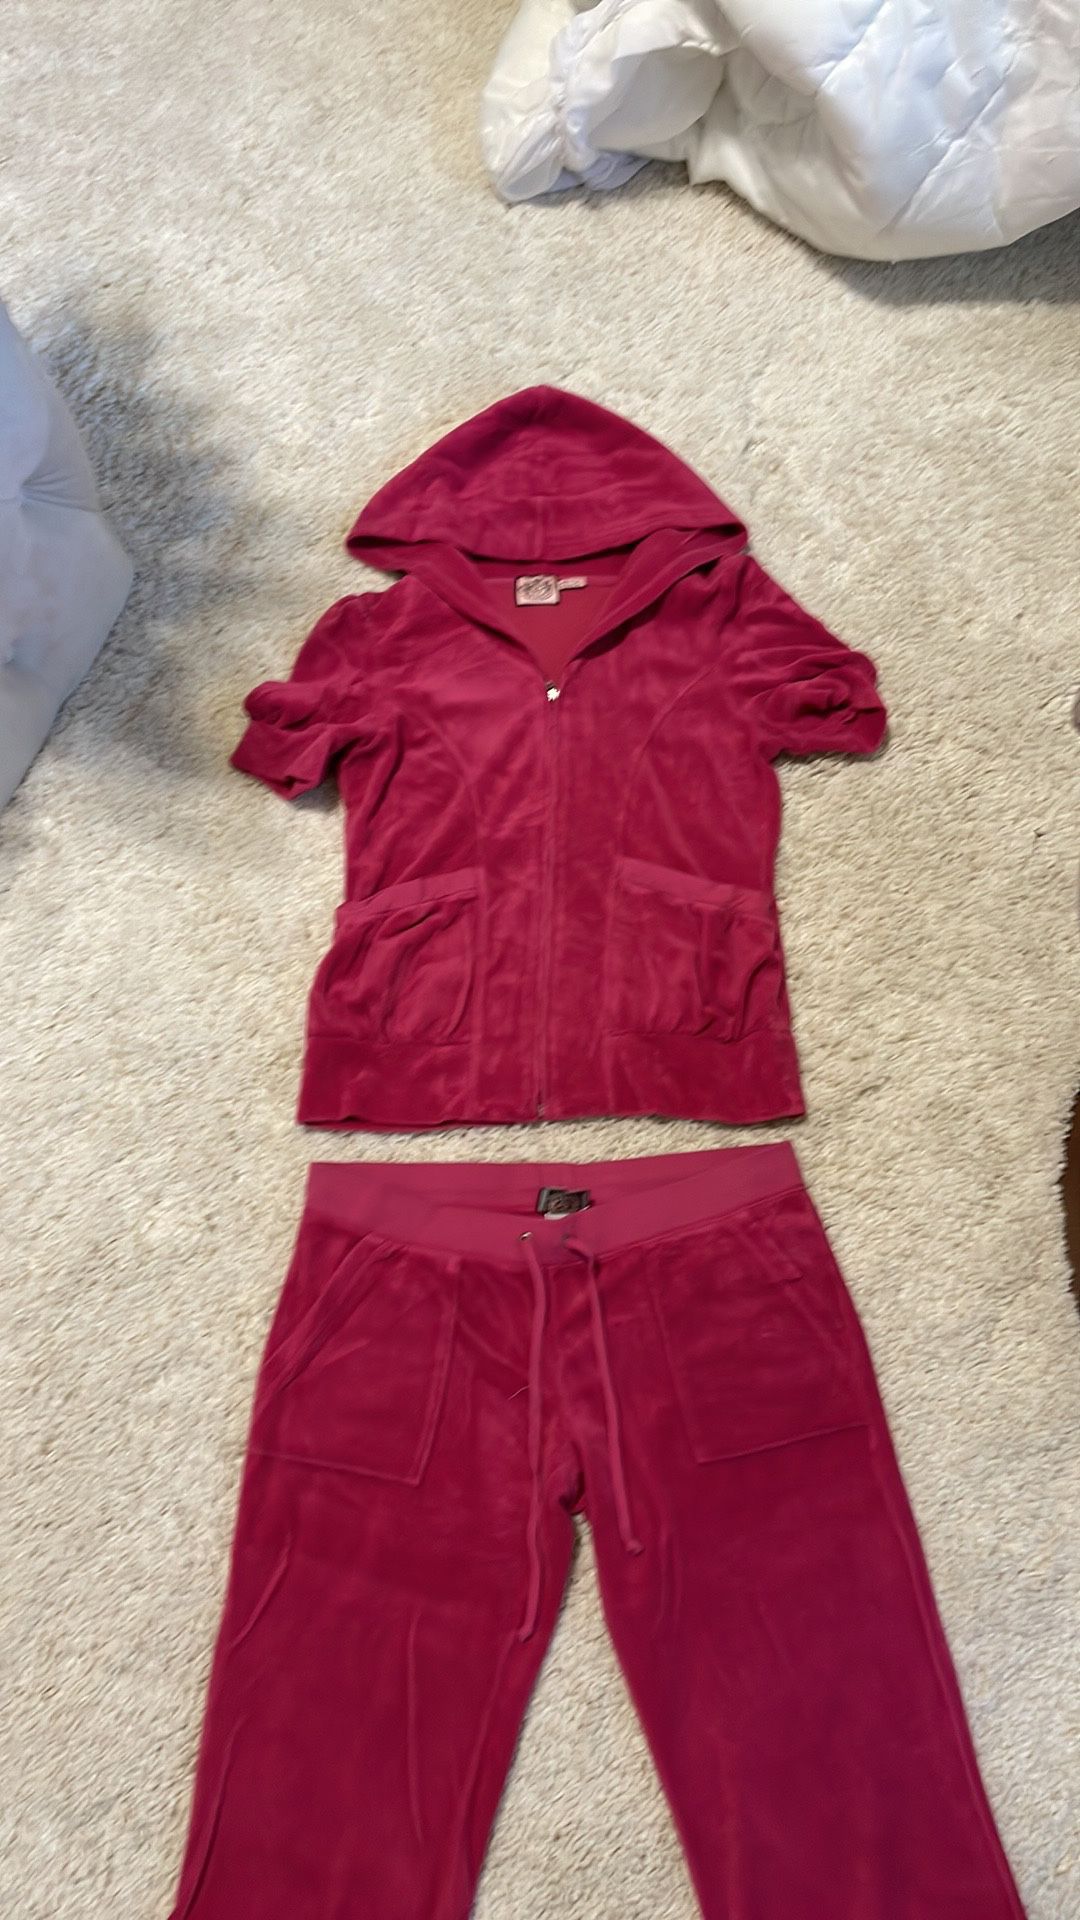 Original juicy couture set Terry hot pink medium pant large bottom.  short sleeve, pants with back pockets. Worn a couple times